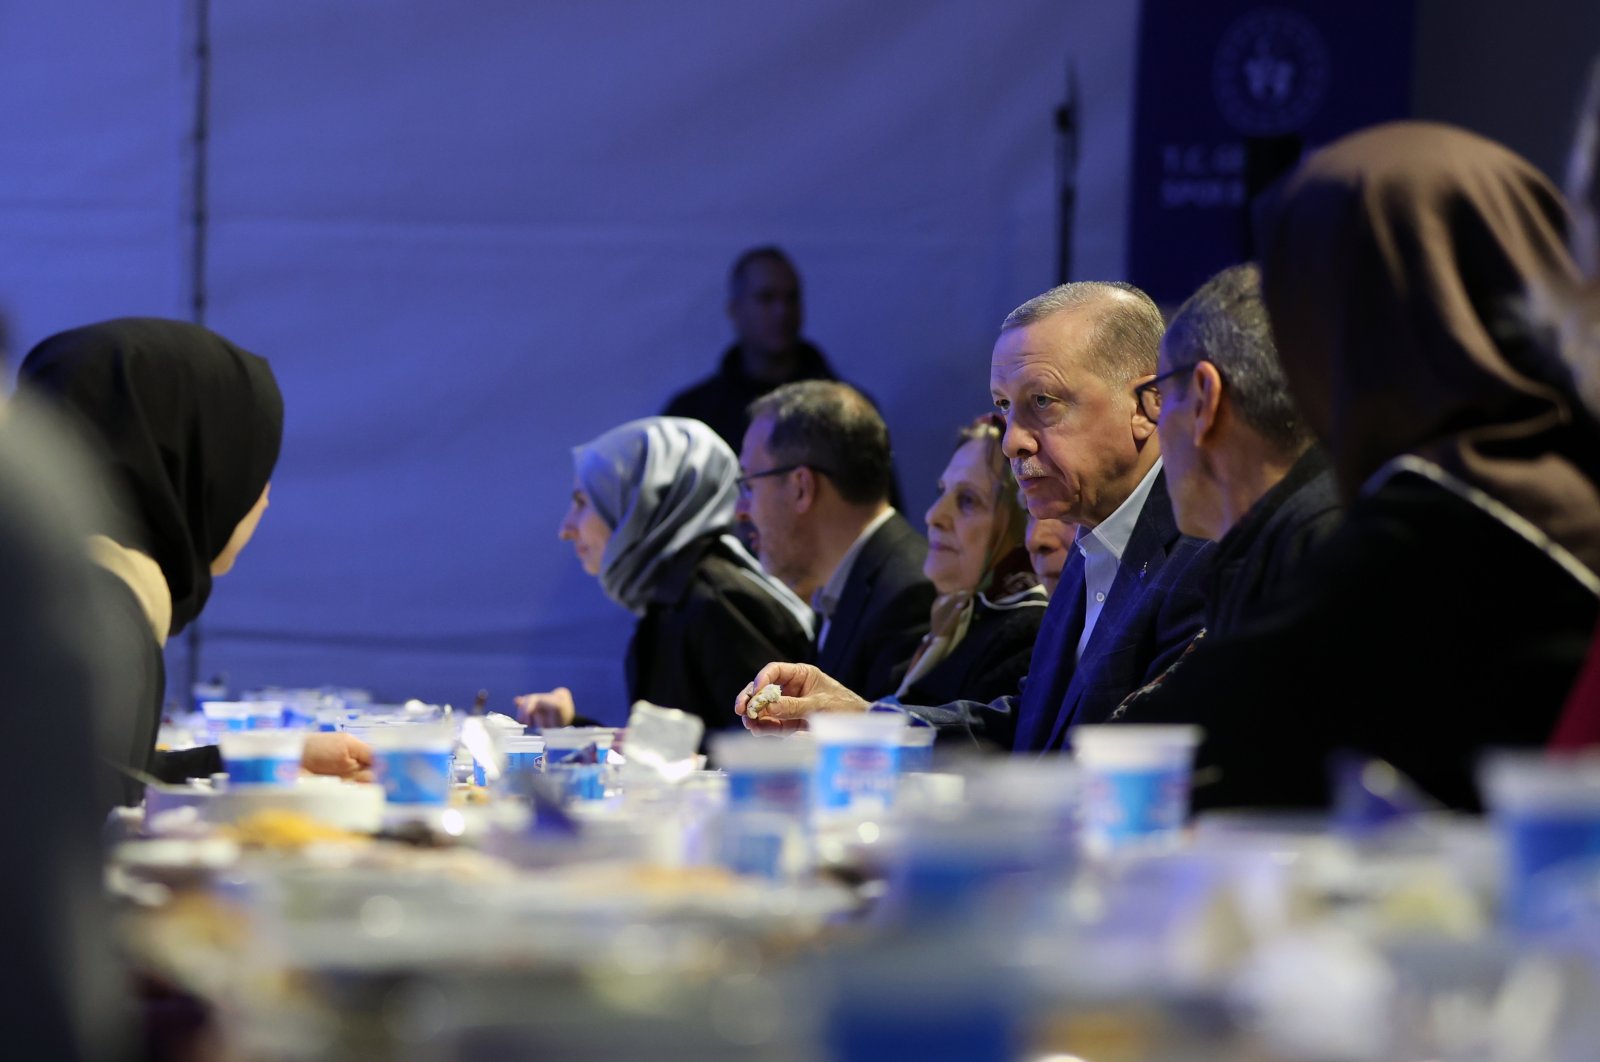 President Recep Tayyip Erdoğan is seen at a dinner with earthquake victims in Istanbul, a special iftar fast-breaking meal for the holy Islamic month of Ramadan, Türkiye, March 26, 2023 (AA Photo)